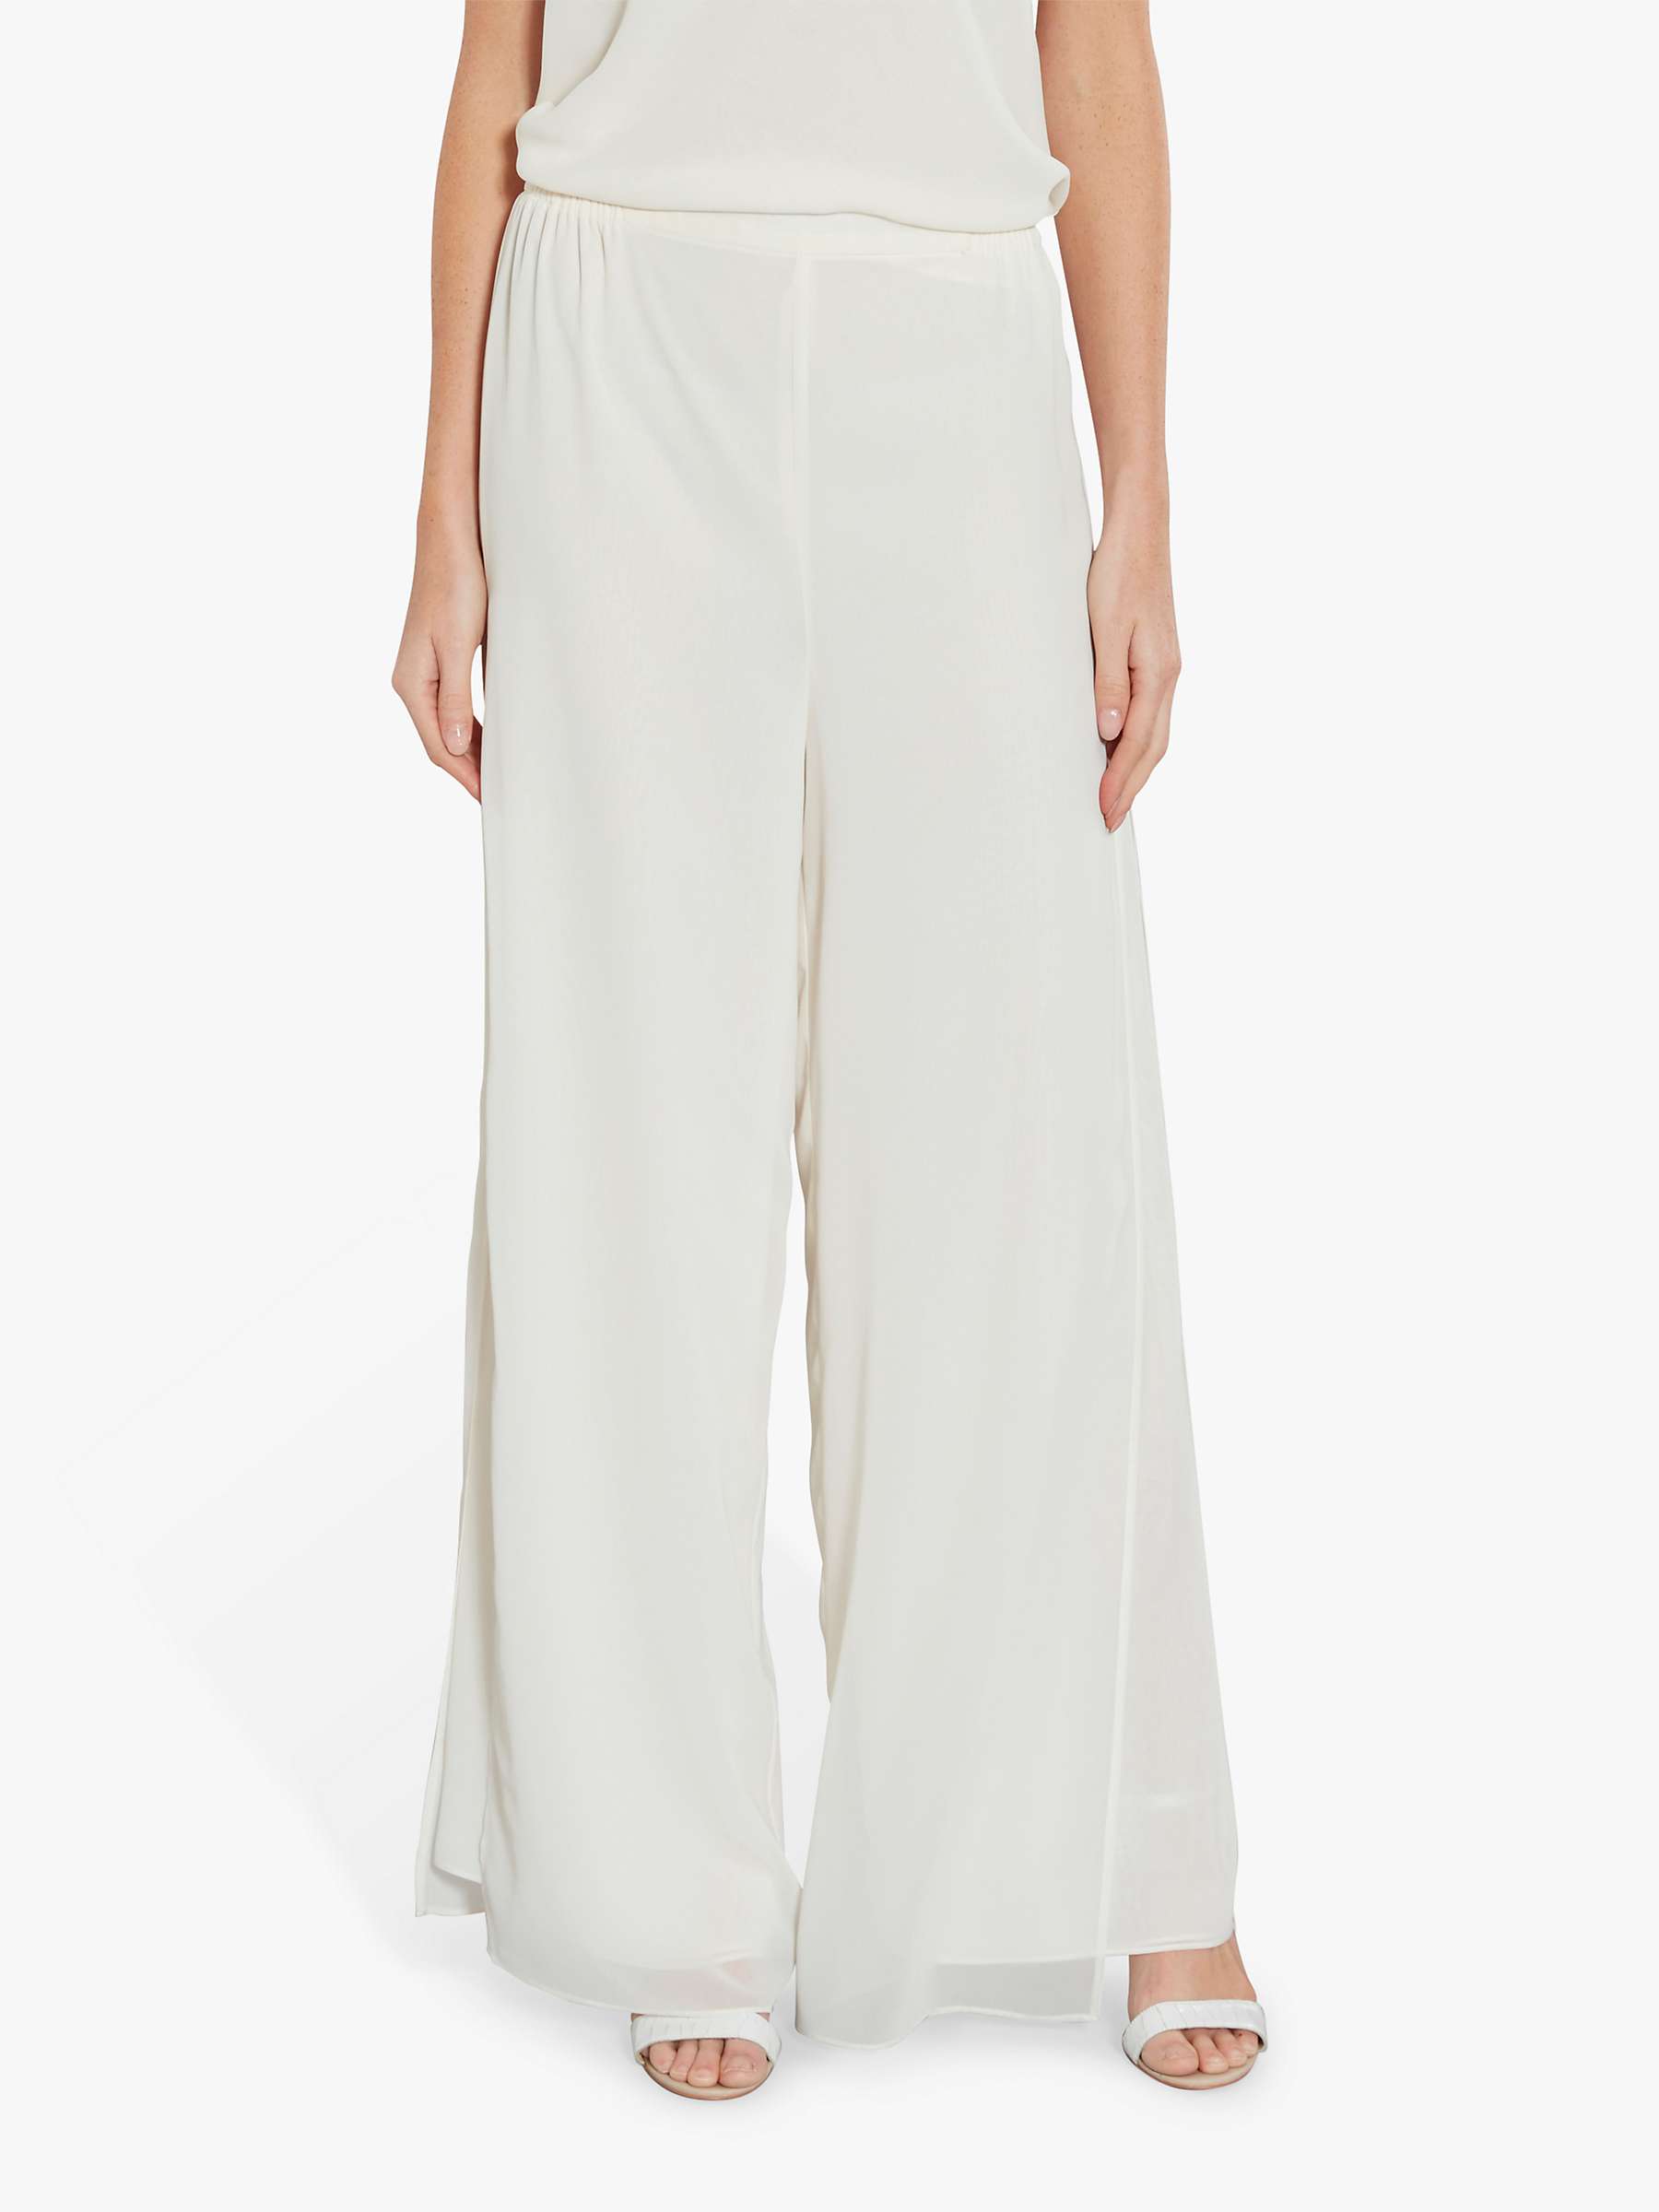 Buy Gina Bacconi Chiffon Layered Trousers With Slits Online at johnlewis.com